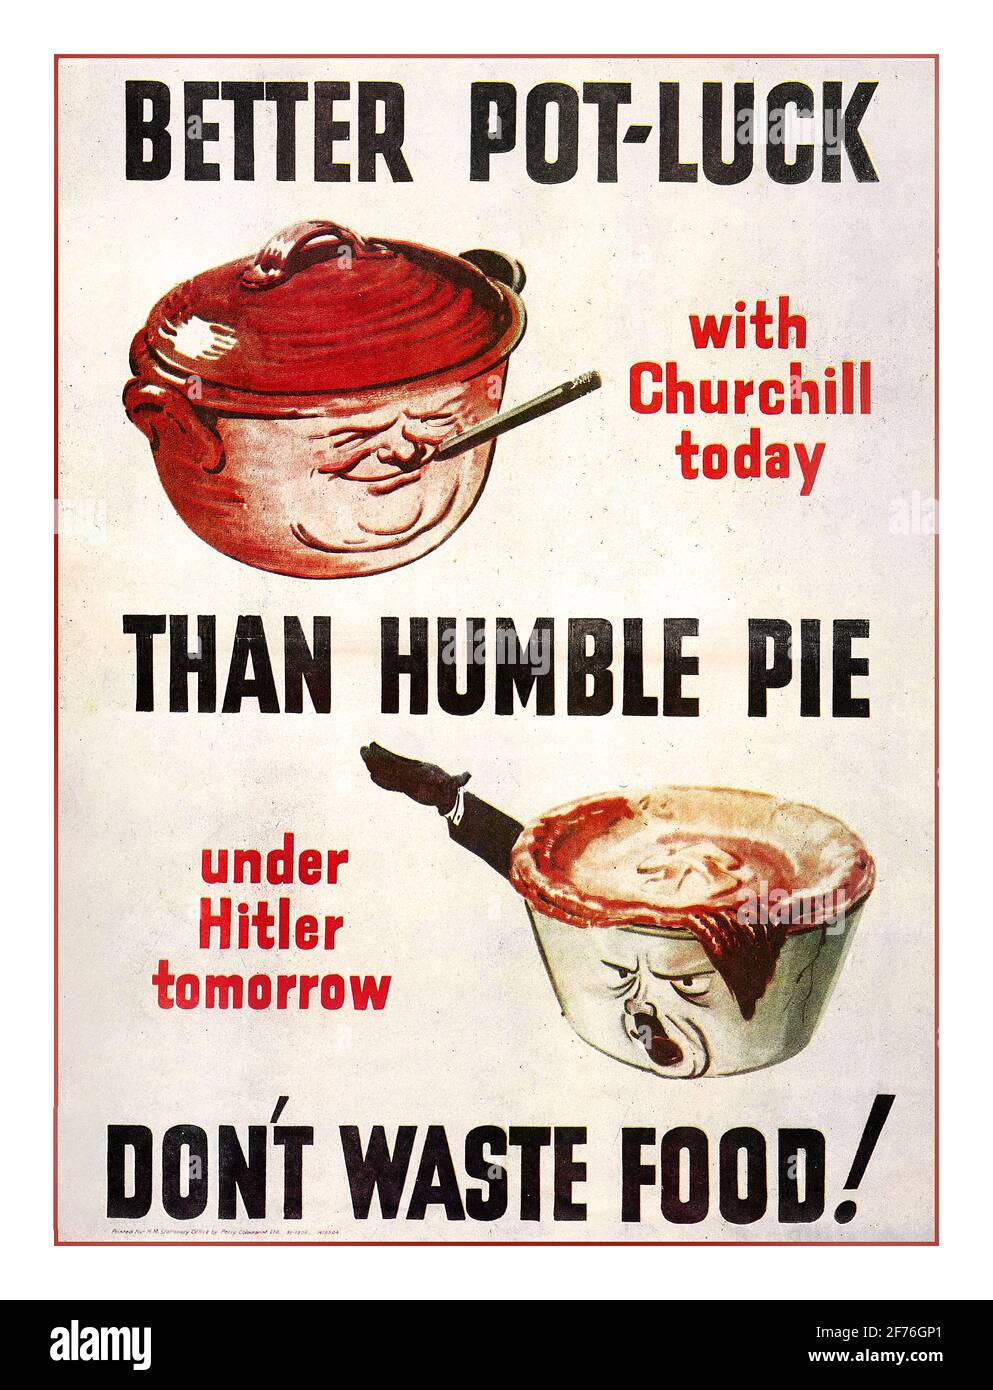 WW2 UK British Propaganda Food Waste Poster 'Better pot-luck with Churchill today than humble pie under Hitler tomorrow Don’t waste food!' 1940-1944 World War II Stock Photo